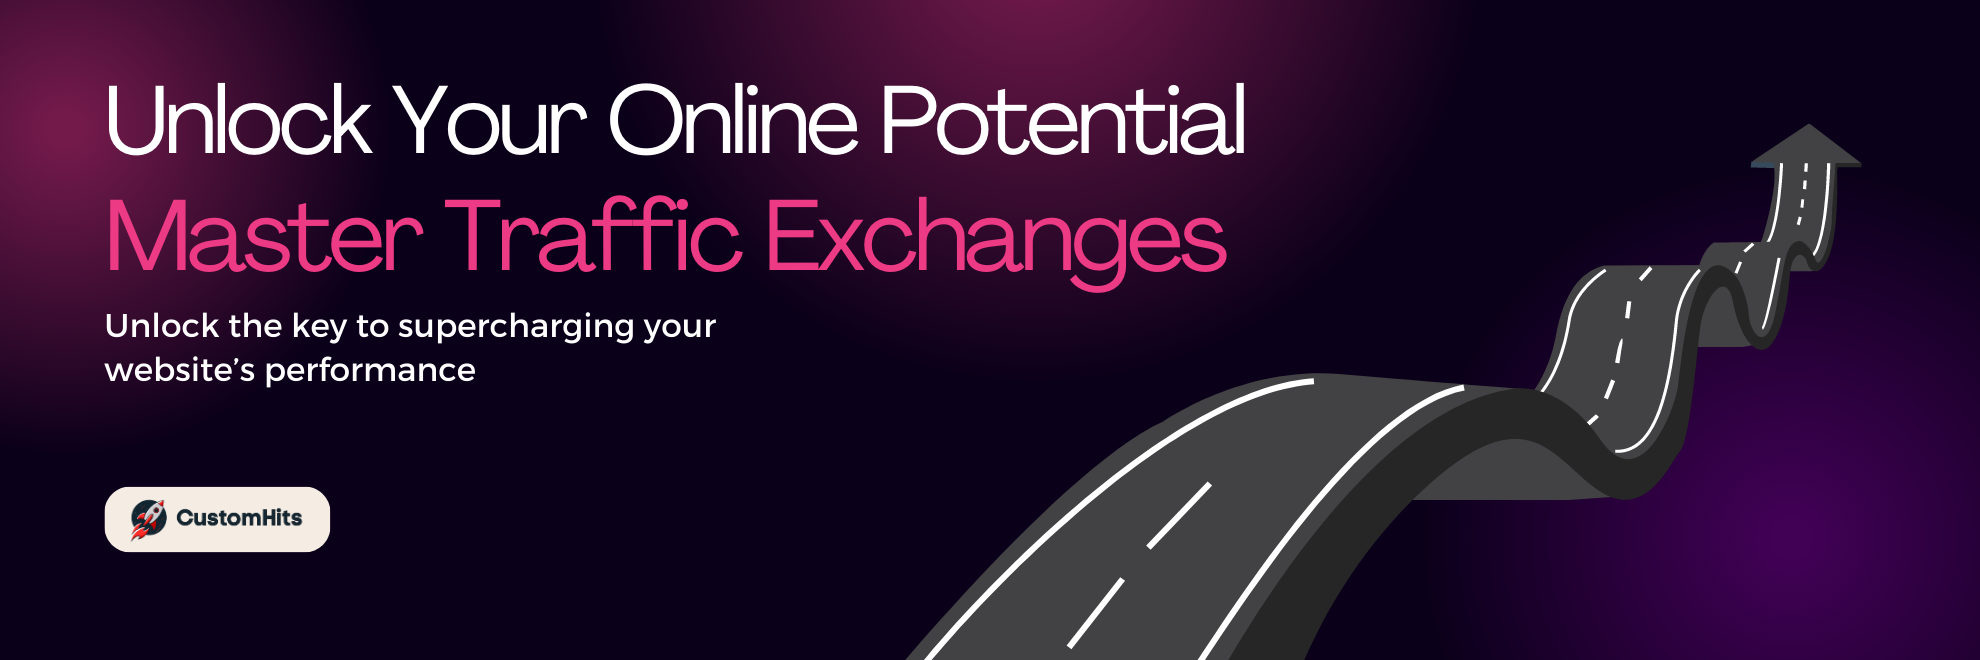 Unlock Your Online Potential: Master Automated Traffic Exchange Now